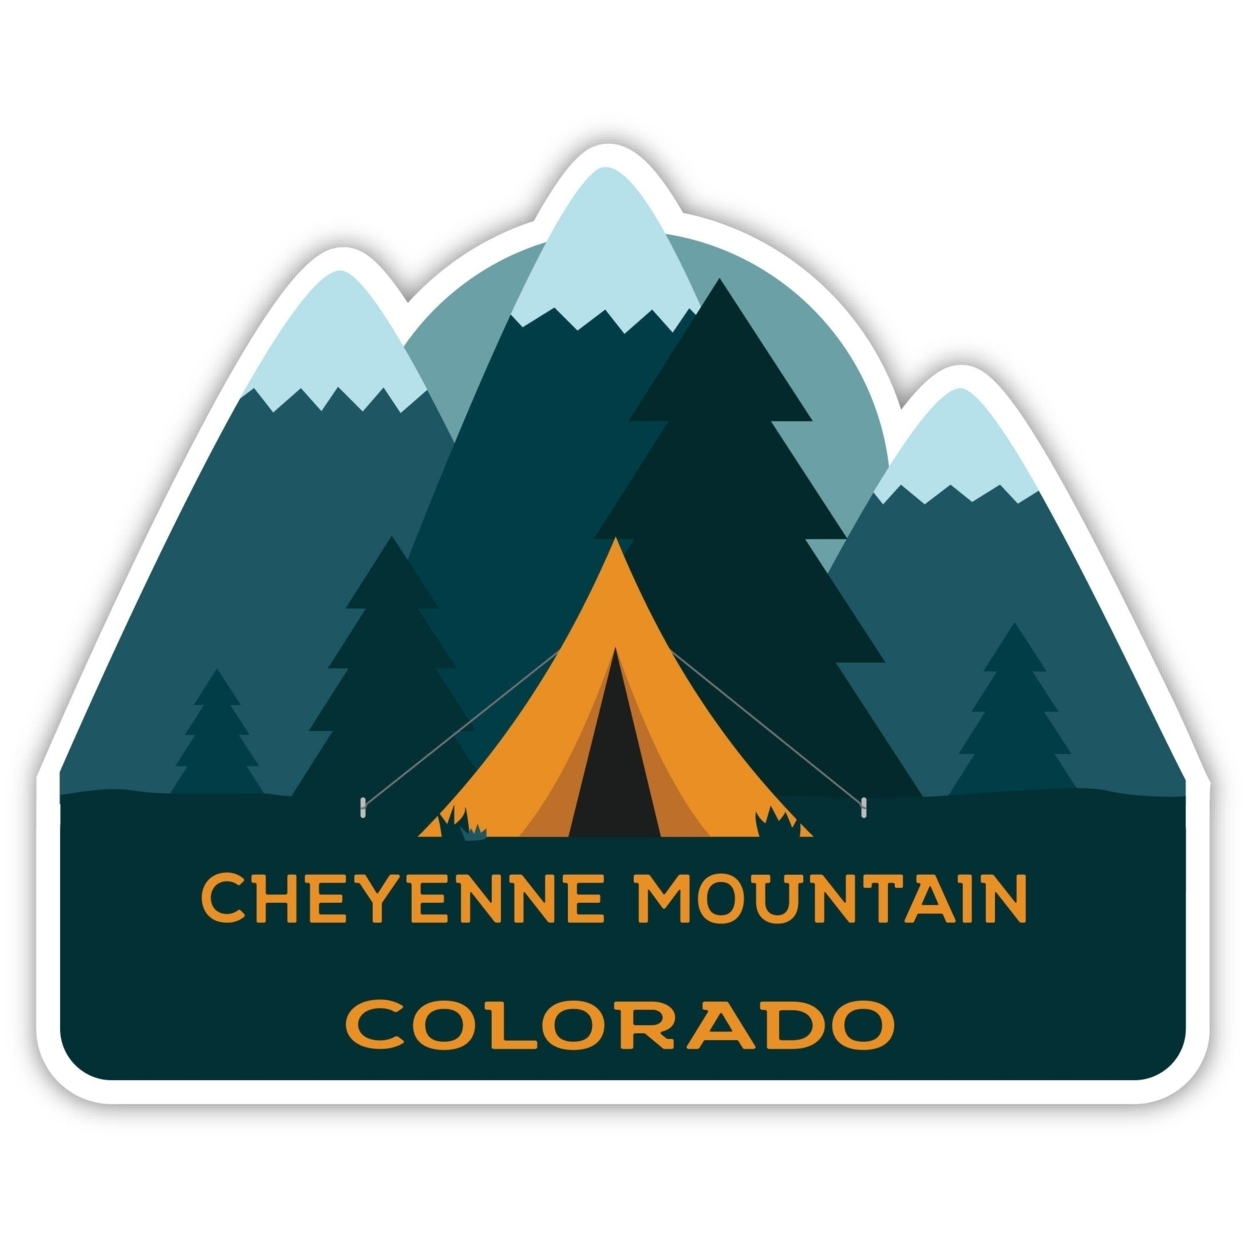 Cheyenne Mountain Colorado Souvenir Decorative Stickers (Choose Theme And Size) - 4-Pack, 8-Inch, Tent